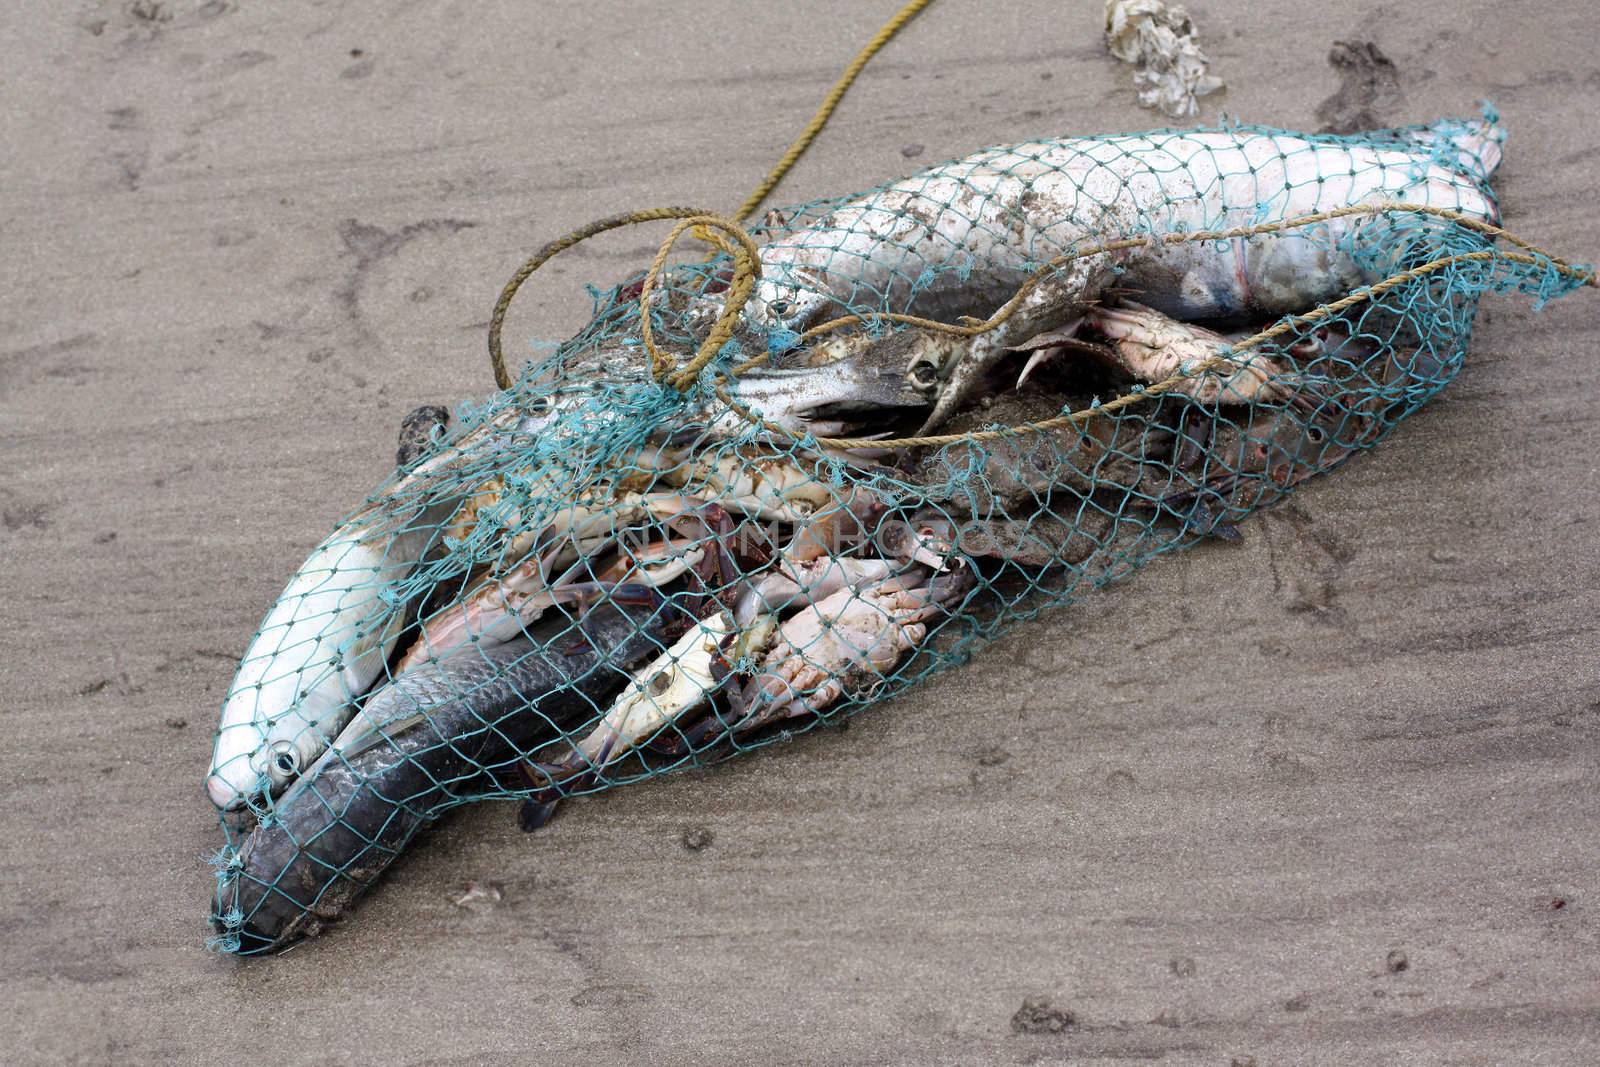 A catch of freshly caught fish in a net.